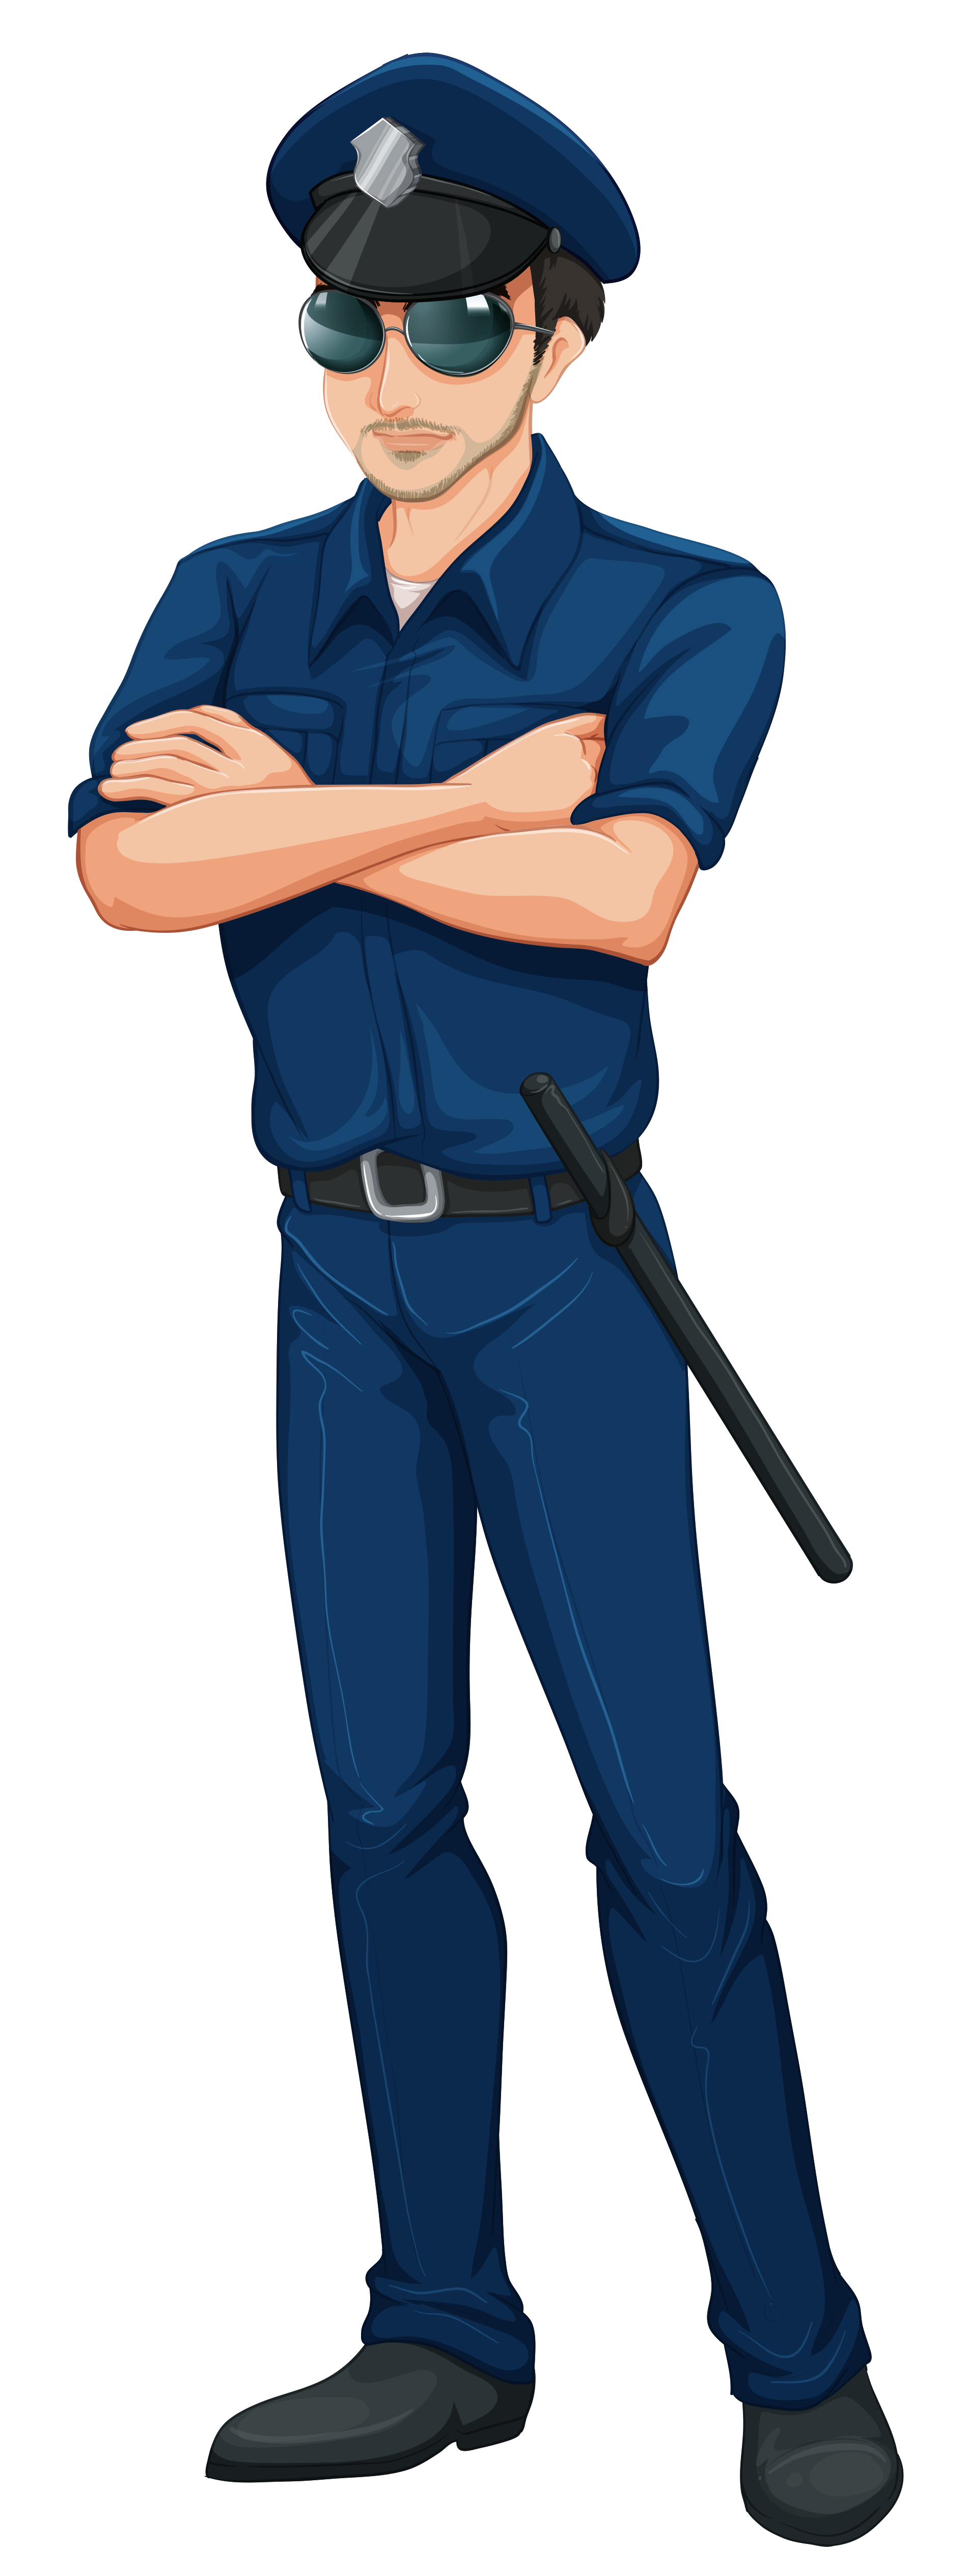 Police Officer Clipart At Getdrawings Free Download